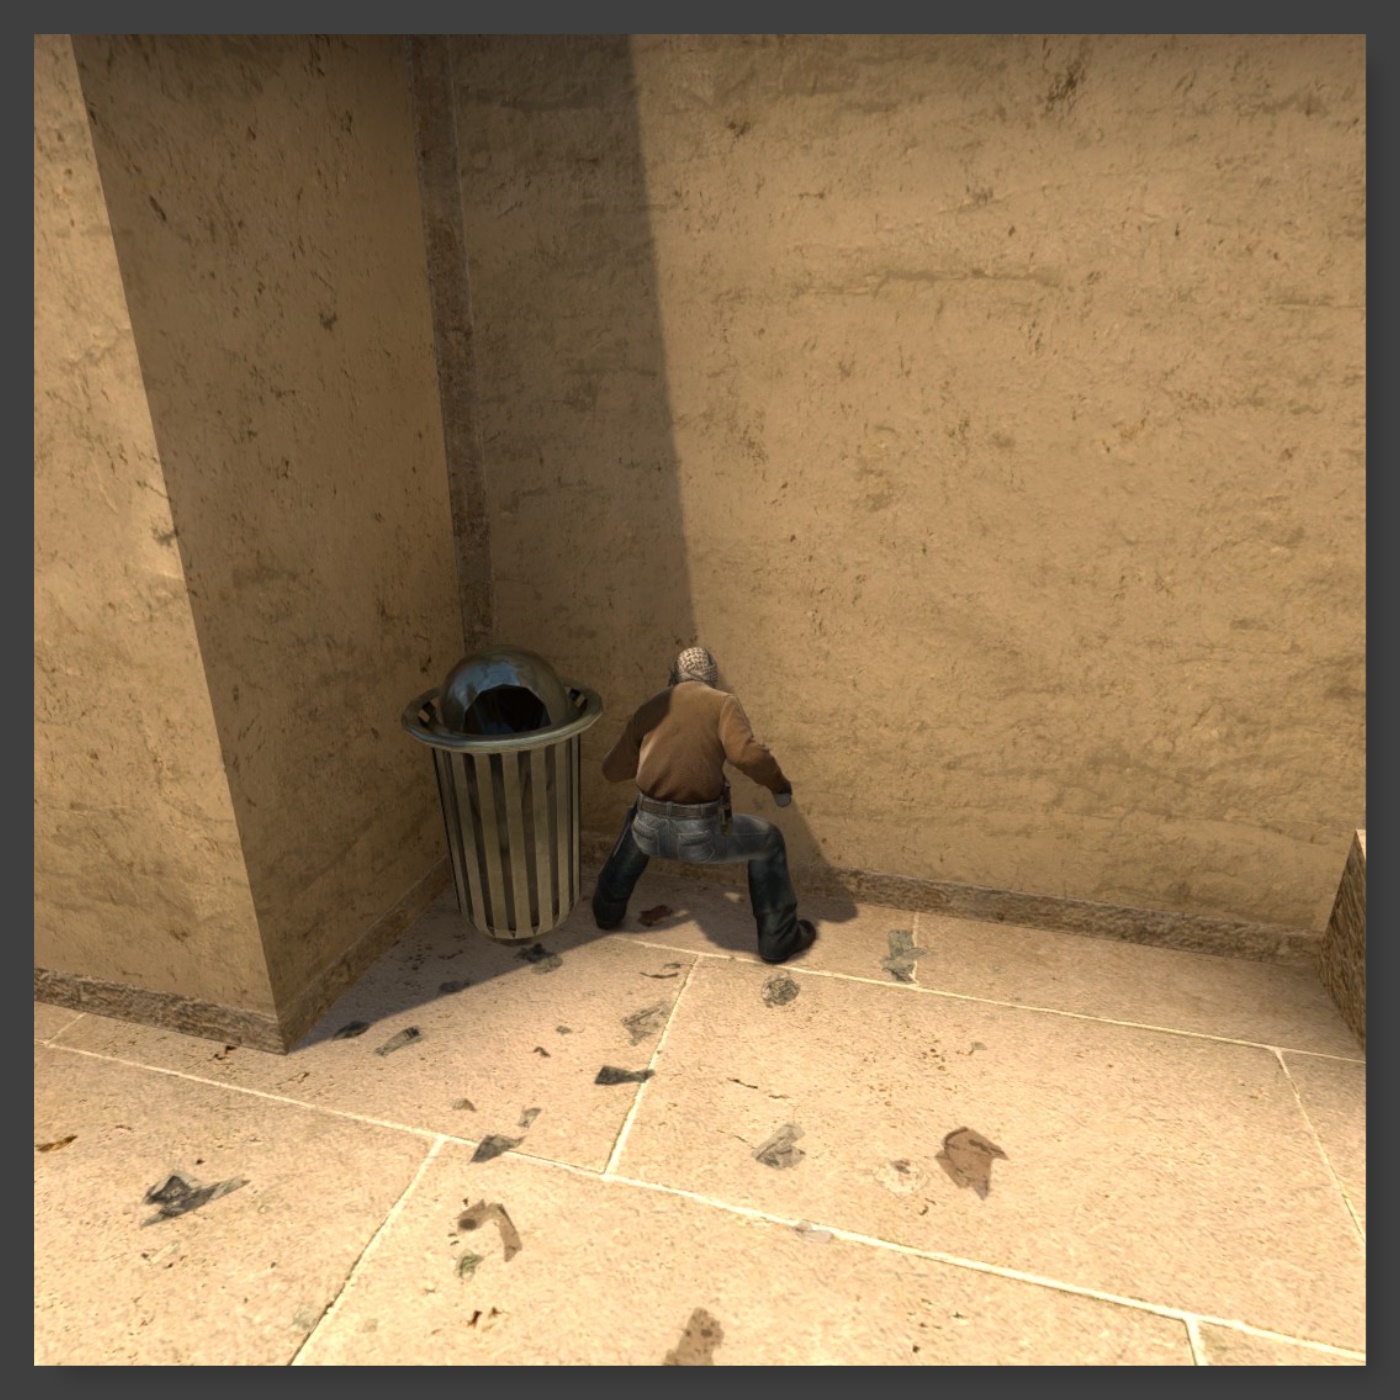 Counter-Strike: Global Offensive - Mid Smokes Mirage Map - Mid Smokes - 2D2F4D2